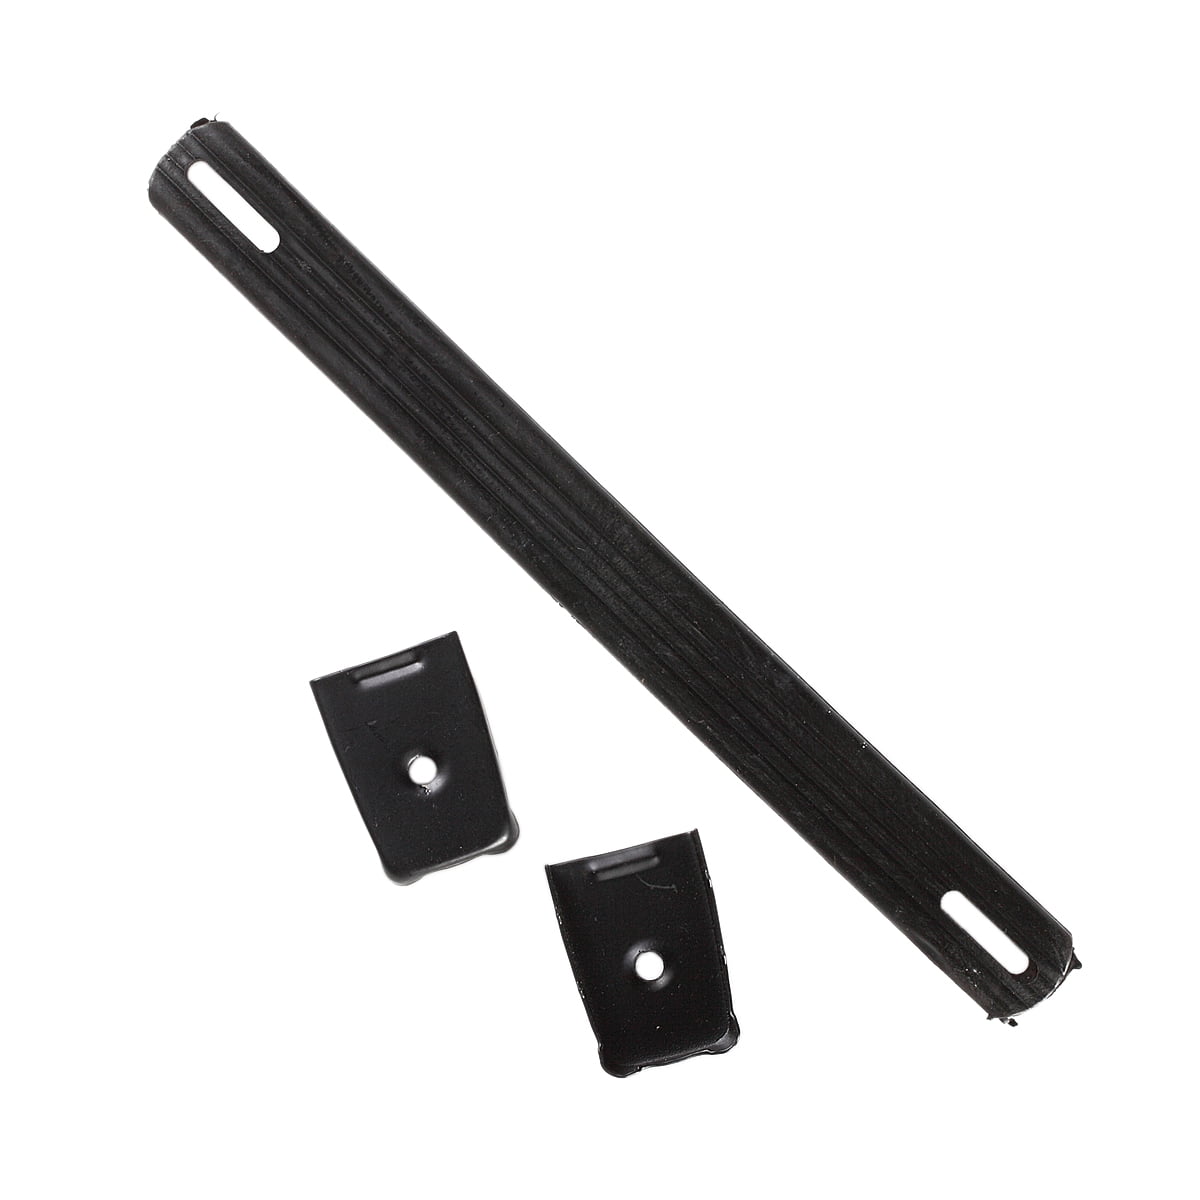 BLACK RUBBER SPEAKER BOX STRAP HANDLE 10" x 1" WITH FITTINGS  # SH-01 1 PIECE 